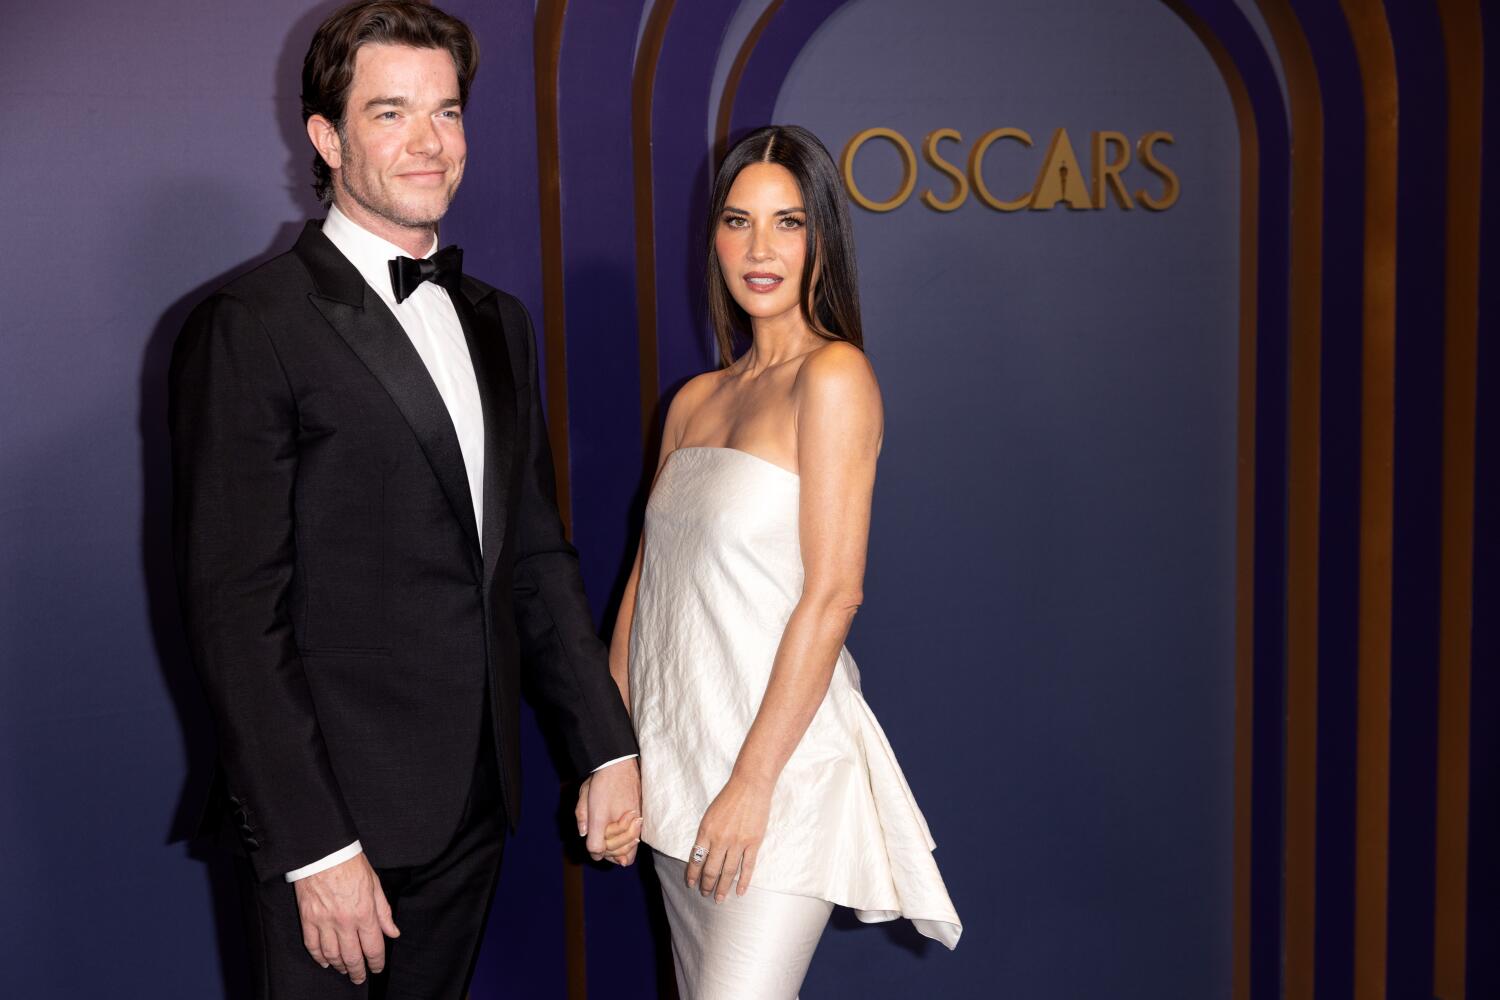 John Mulaney and Olivia Munn are married, three years of dating and a toddler later